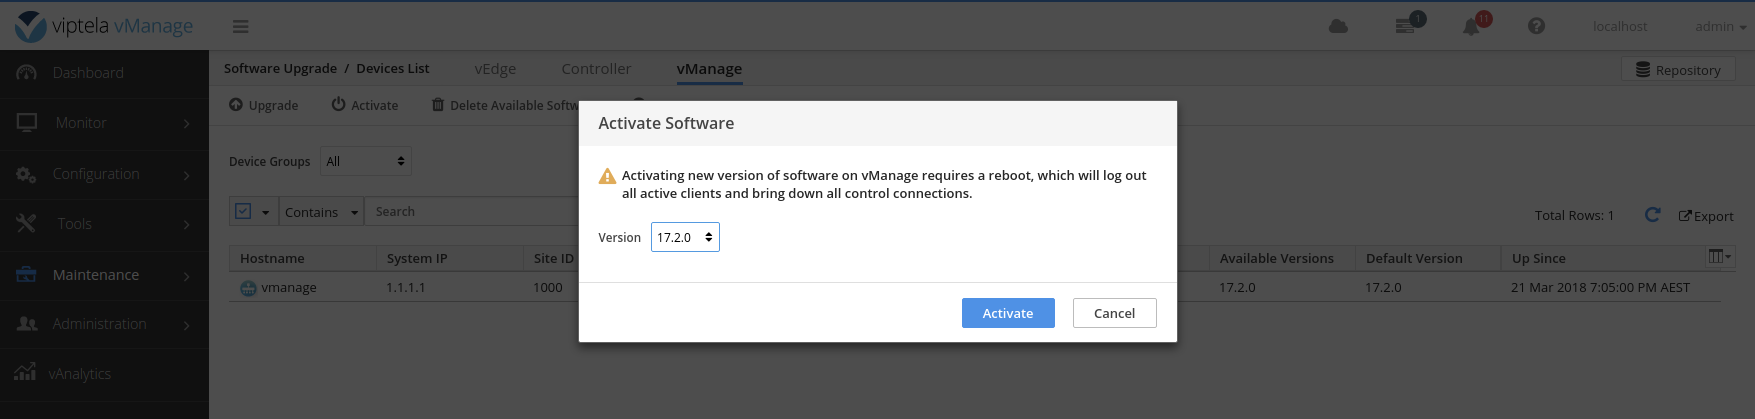 vmanage-software-upgrade-6.png